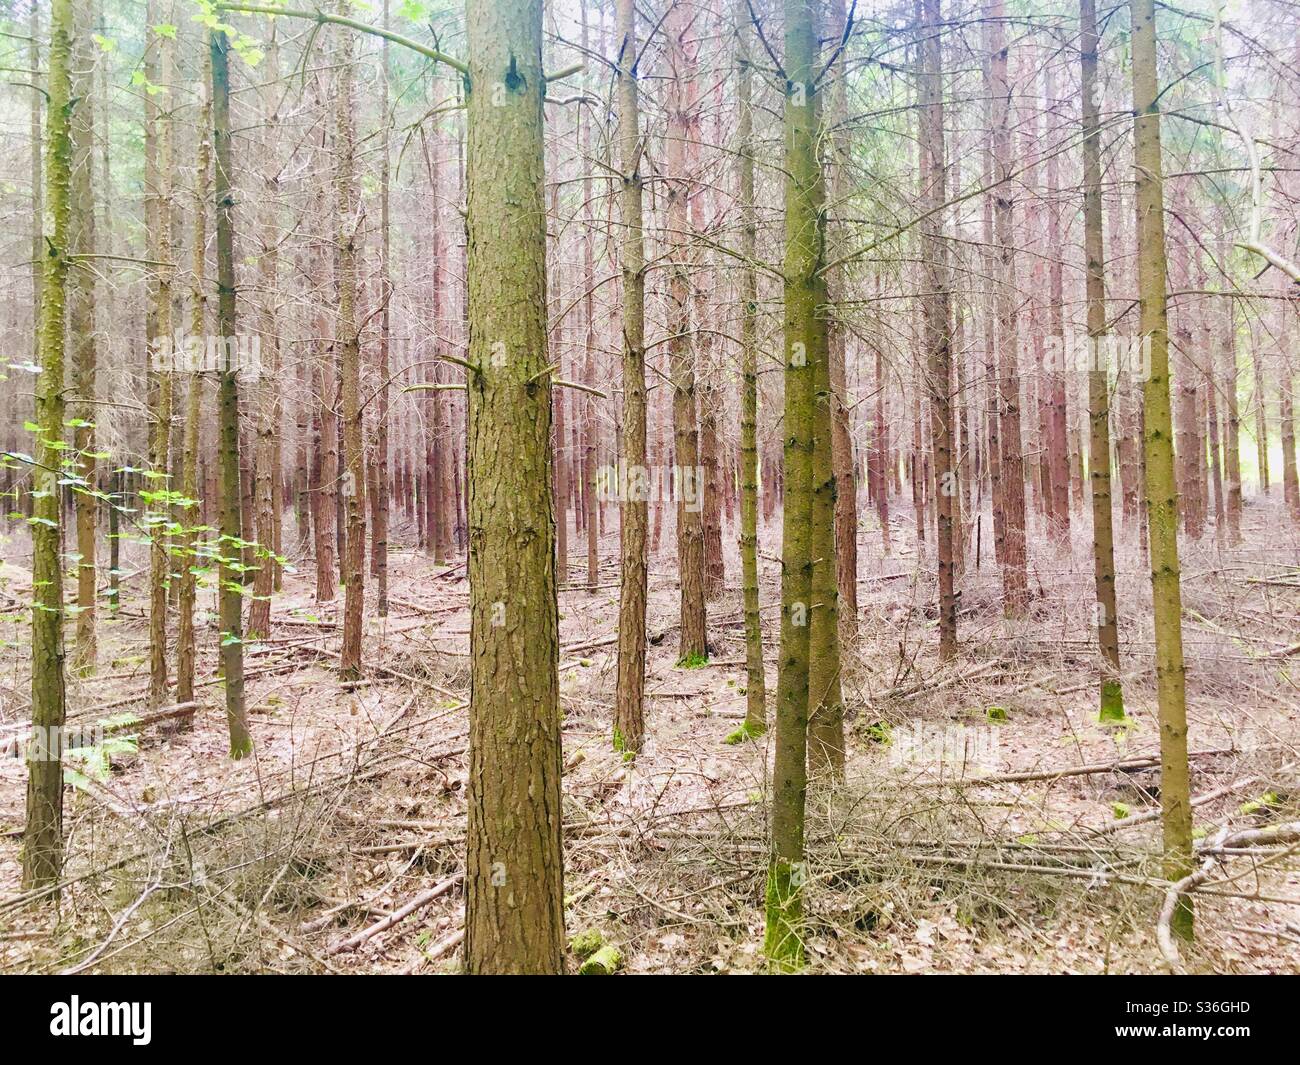 Pine trees in forest in May. Straight tree trunks and pine needle floor. Stock Photo